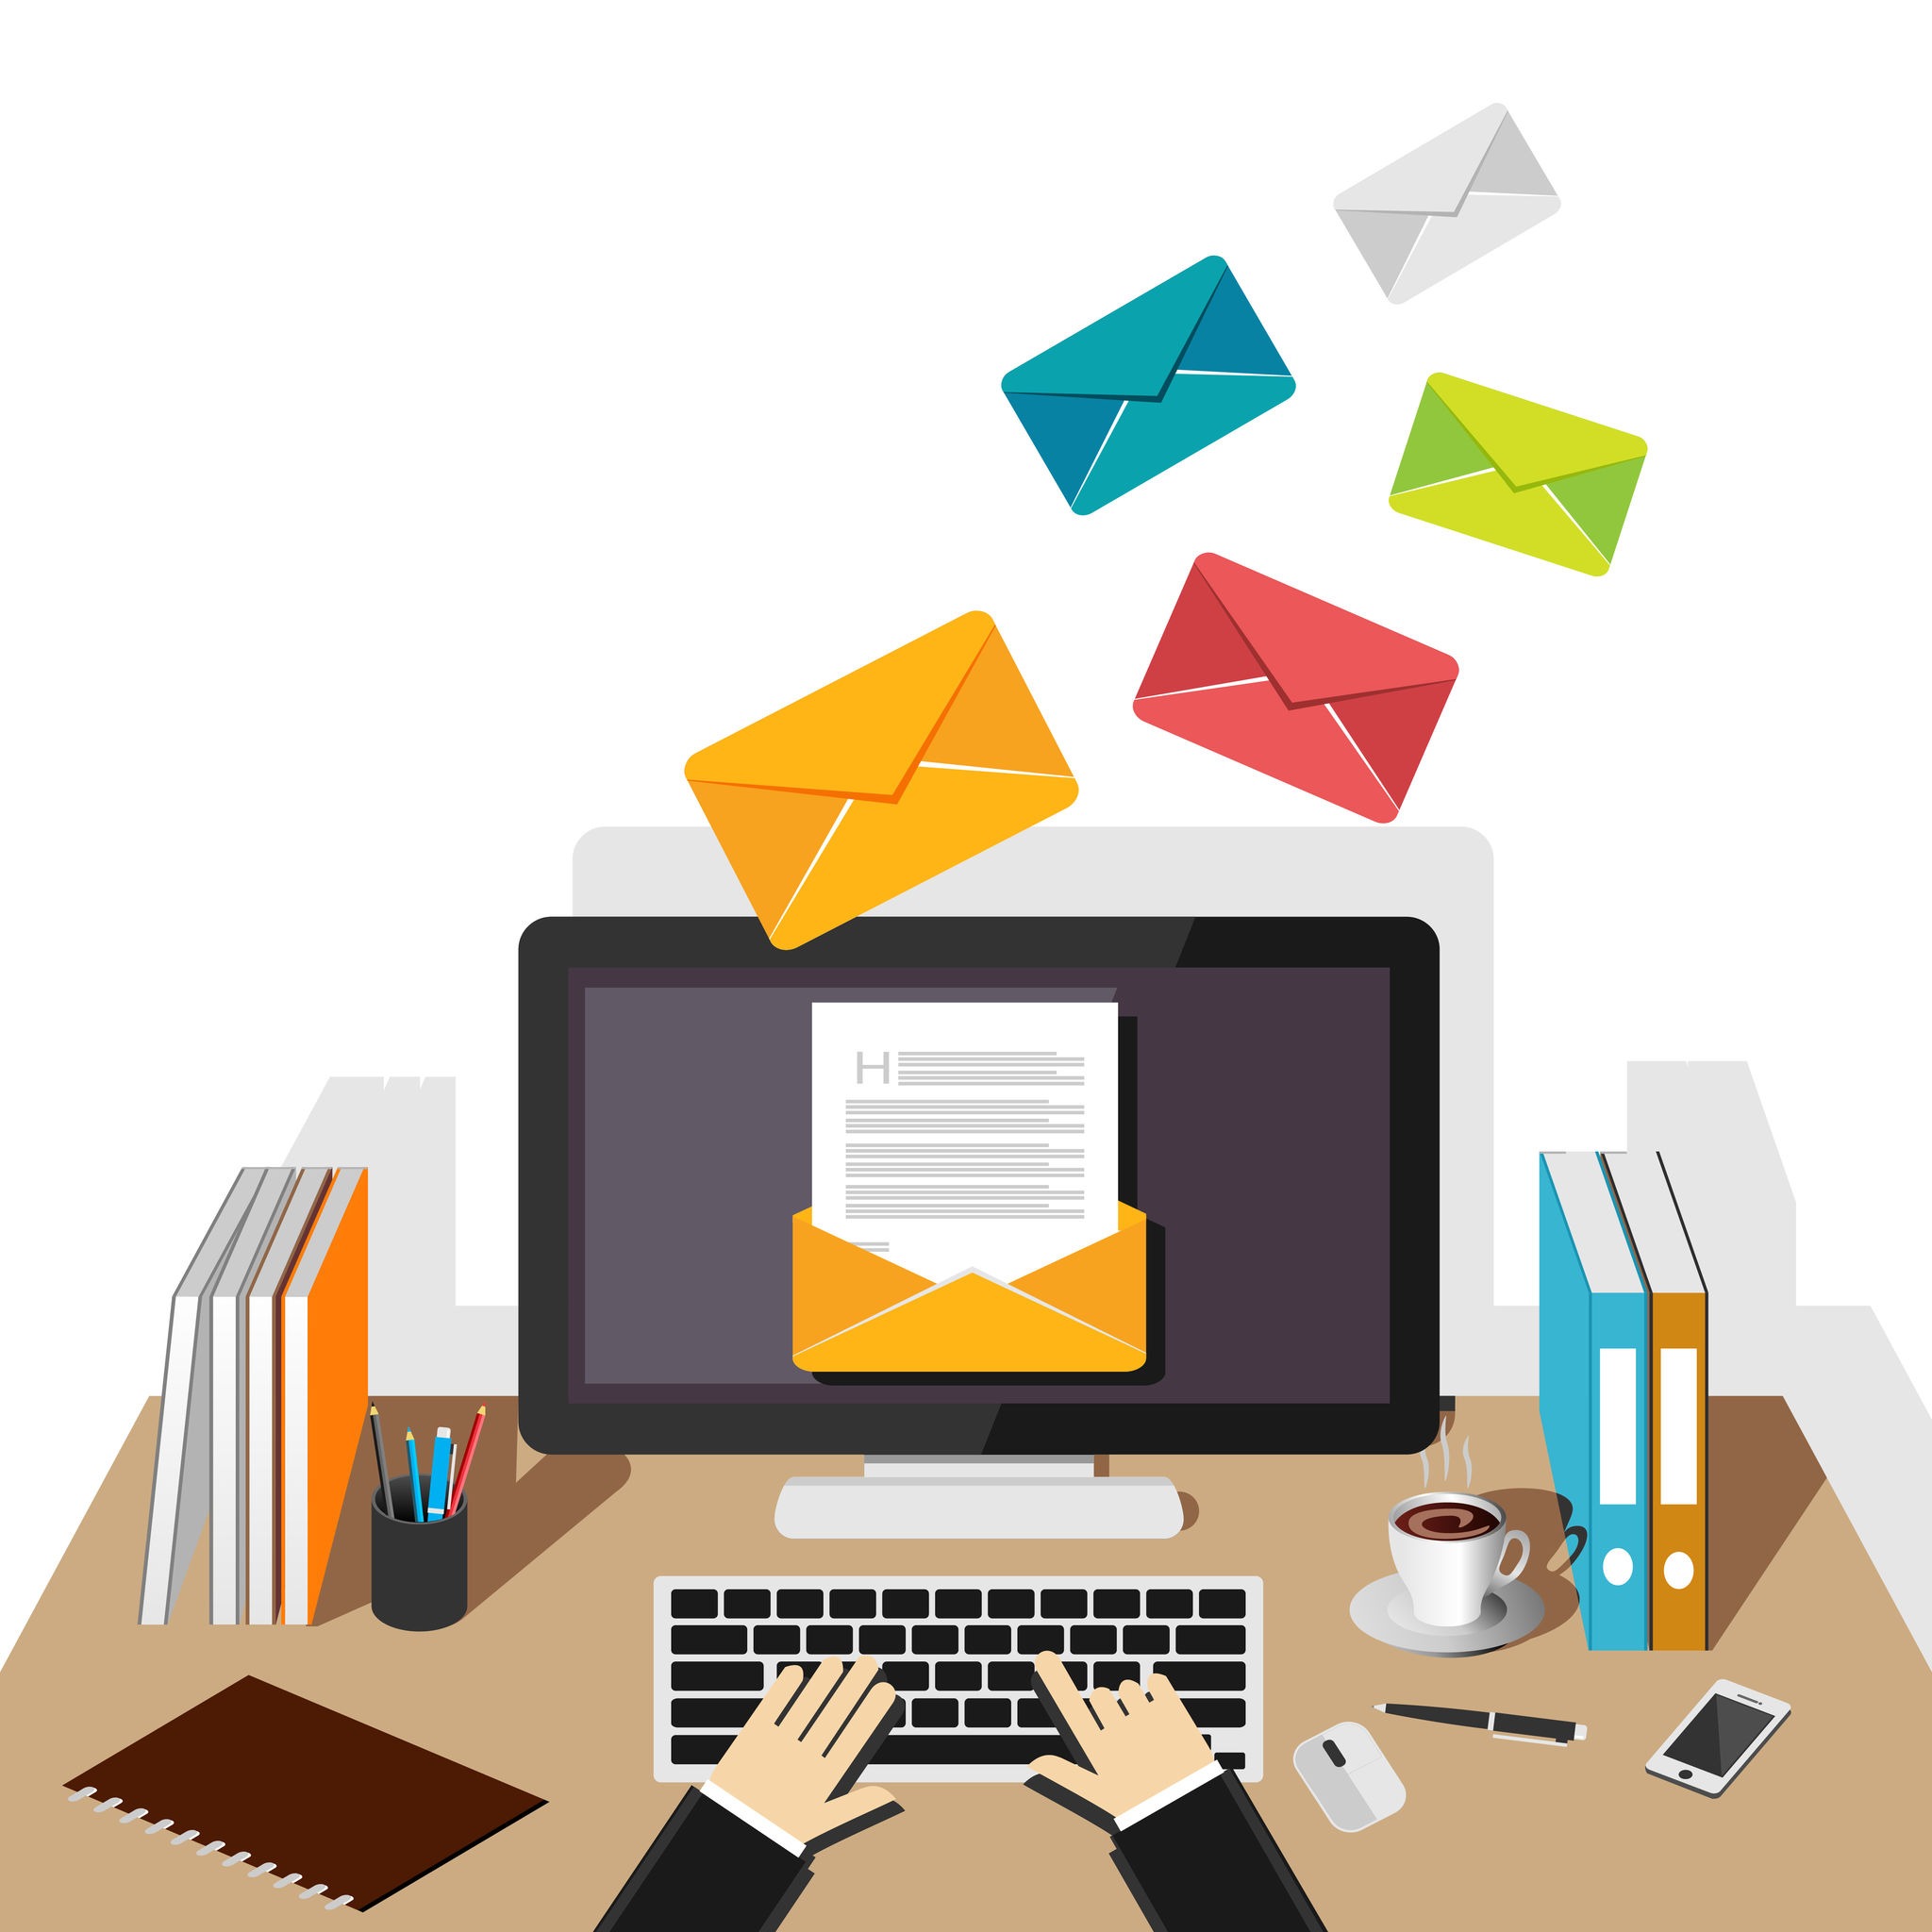 email-rises-COVID-response-effort-comms